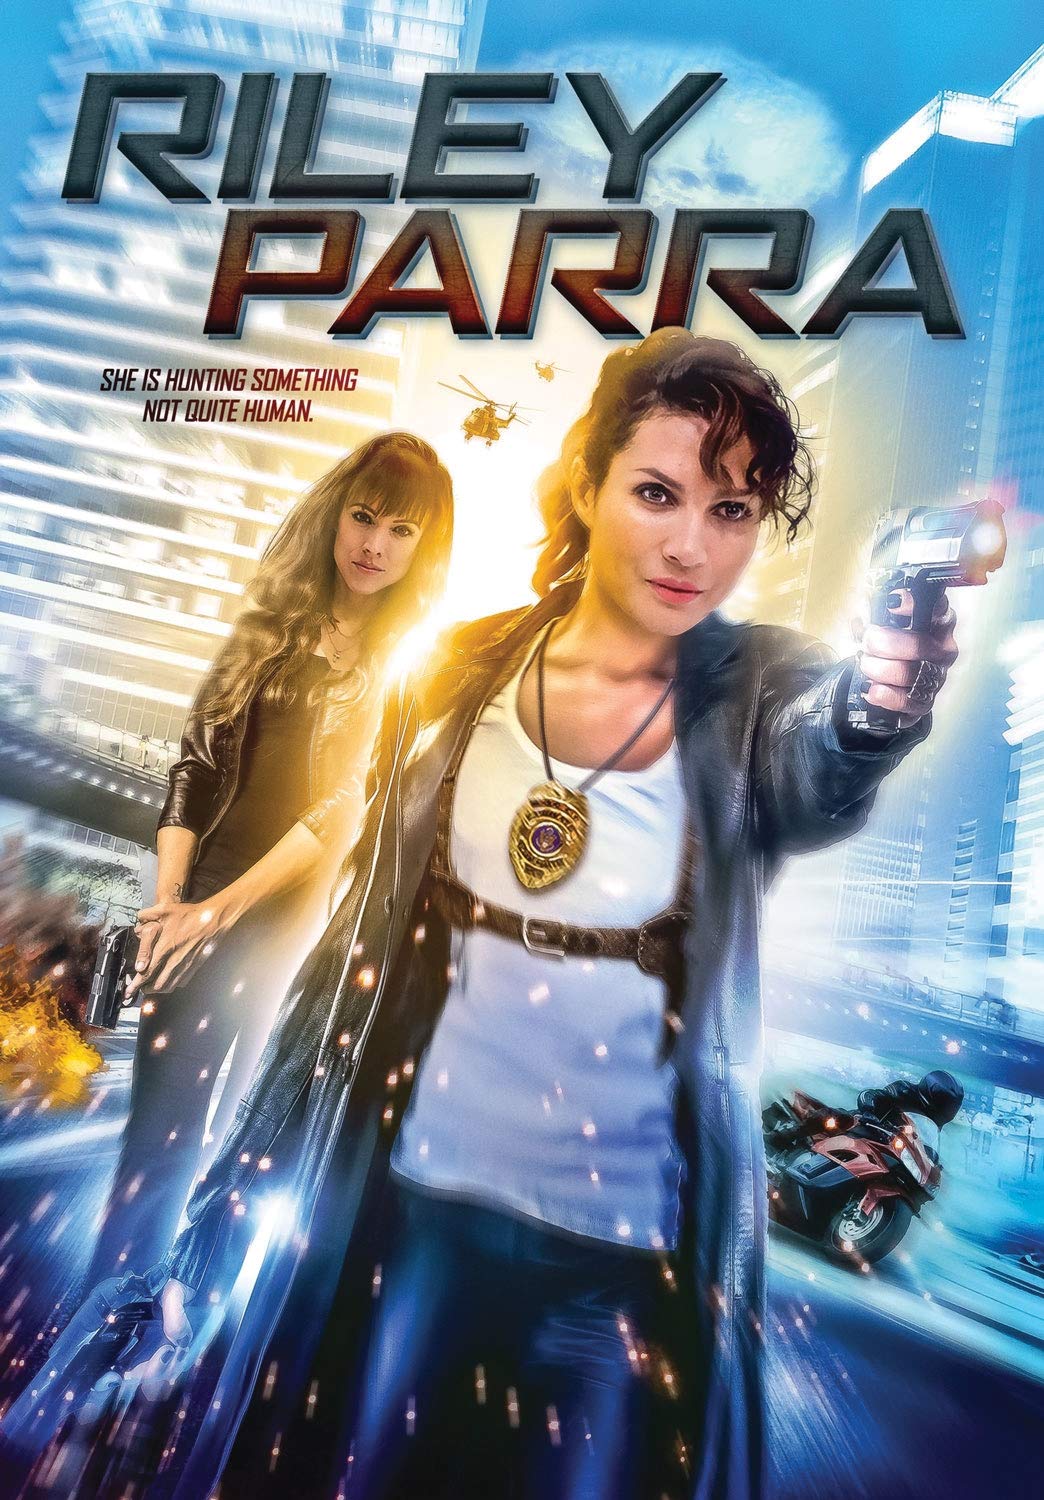 Riley parra better Angels 2019 Hindi dual Audio full movie Download